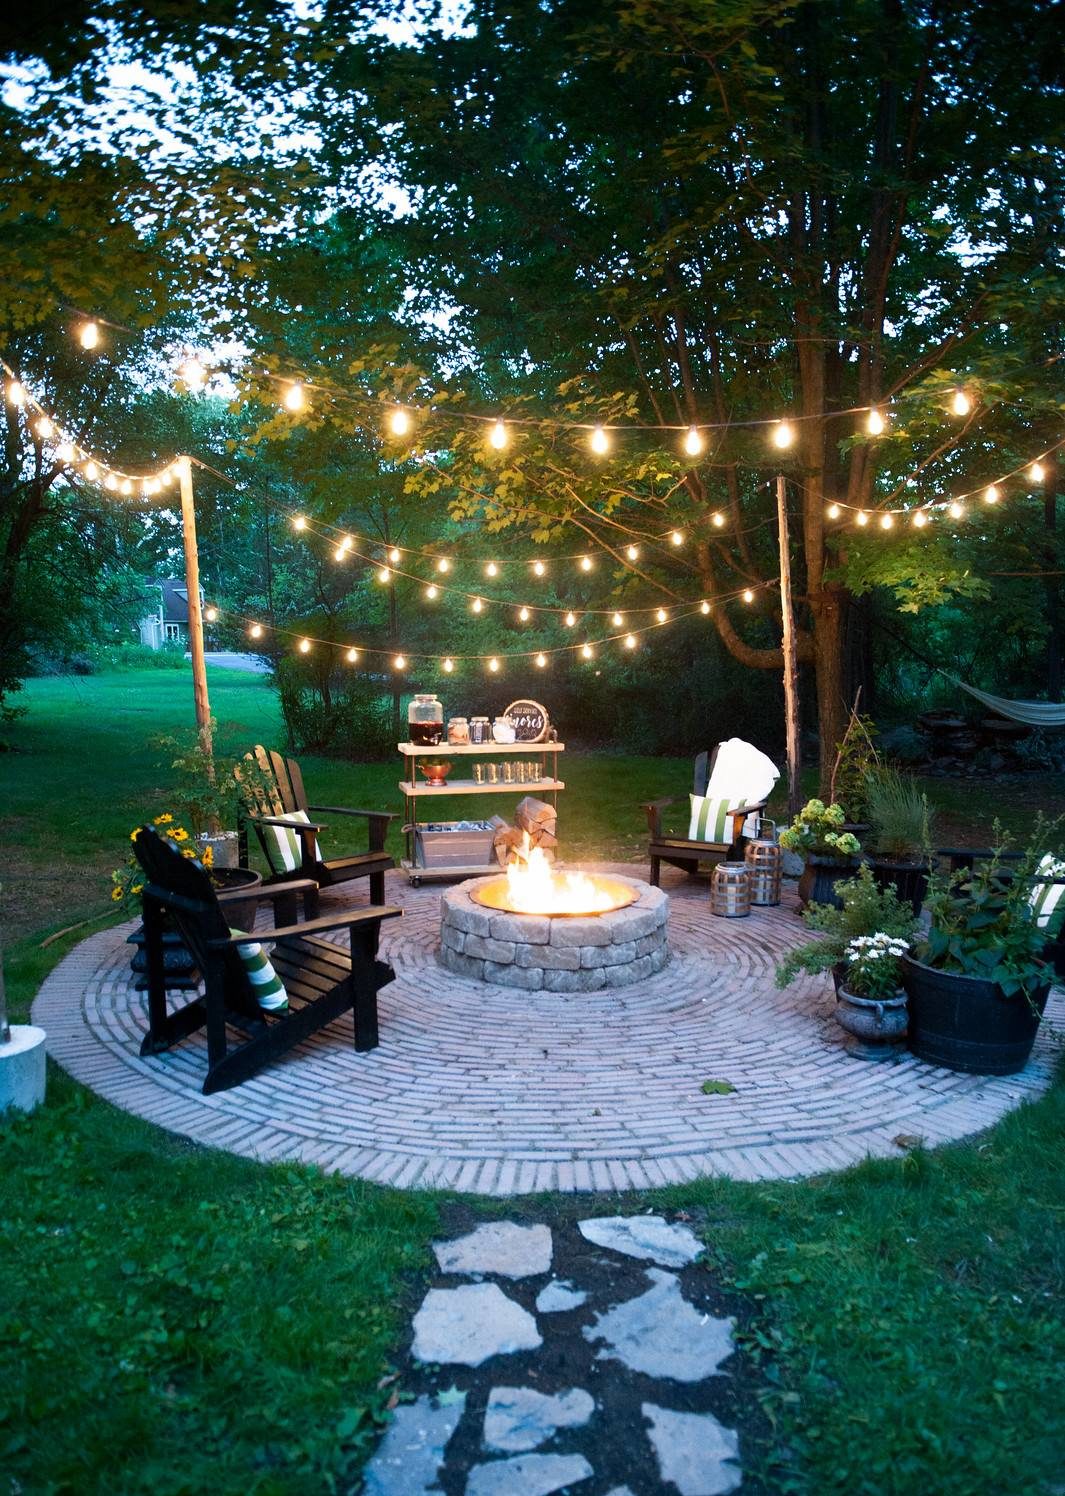 Unique Fire Pit Area Ideas For, How To Make An Outdoor Fire Pit Area